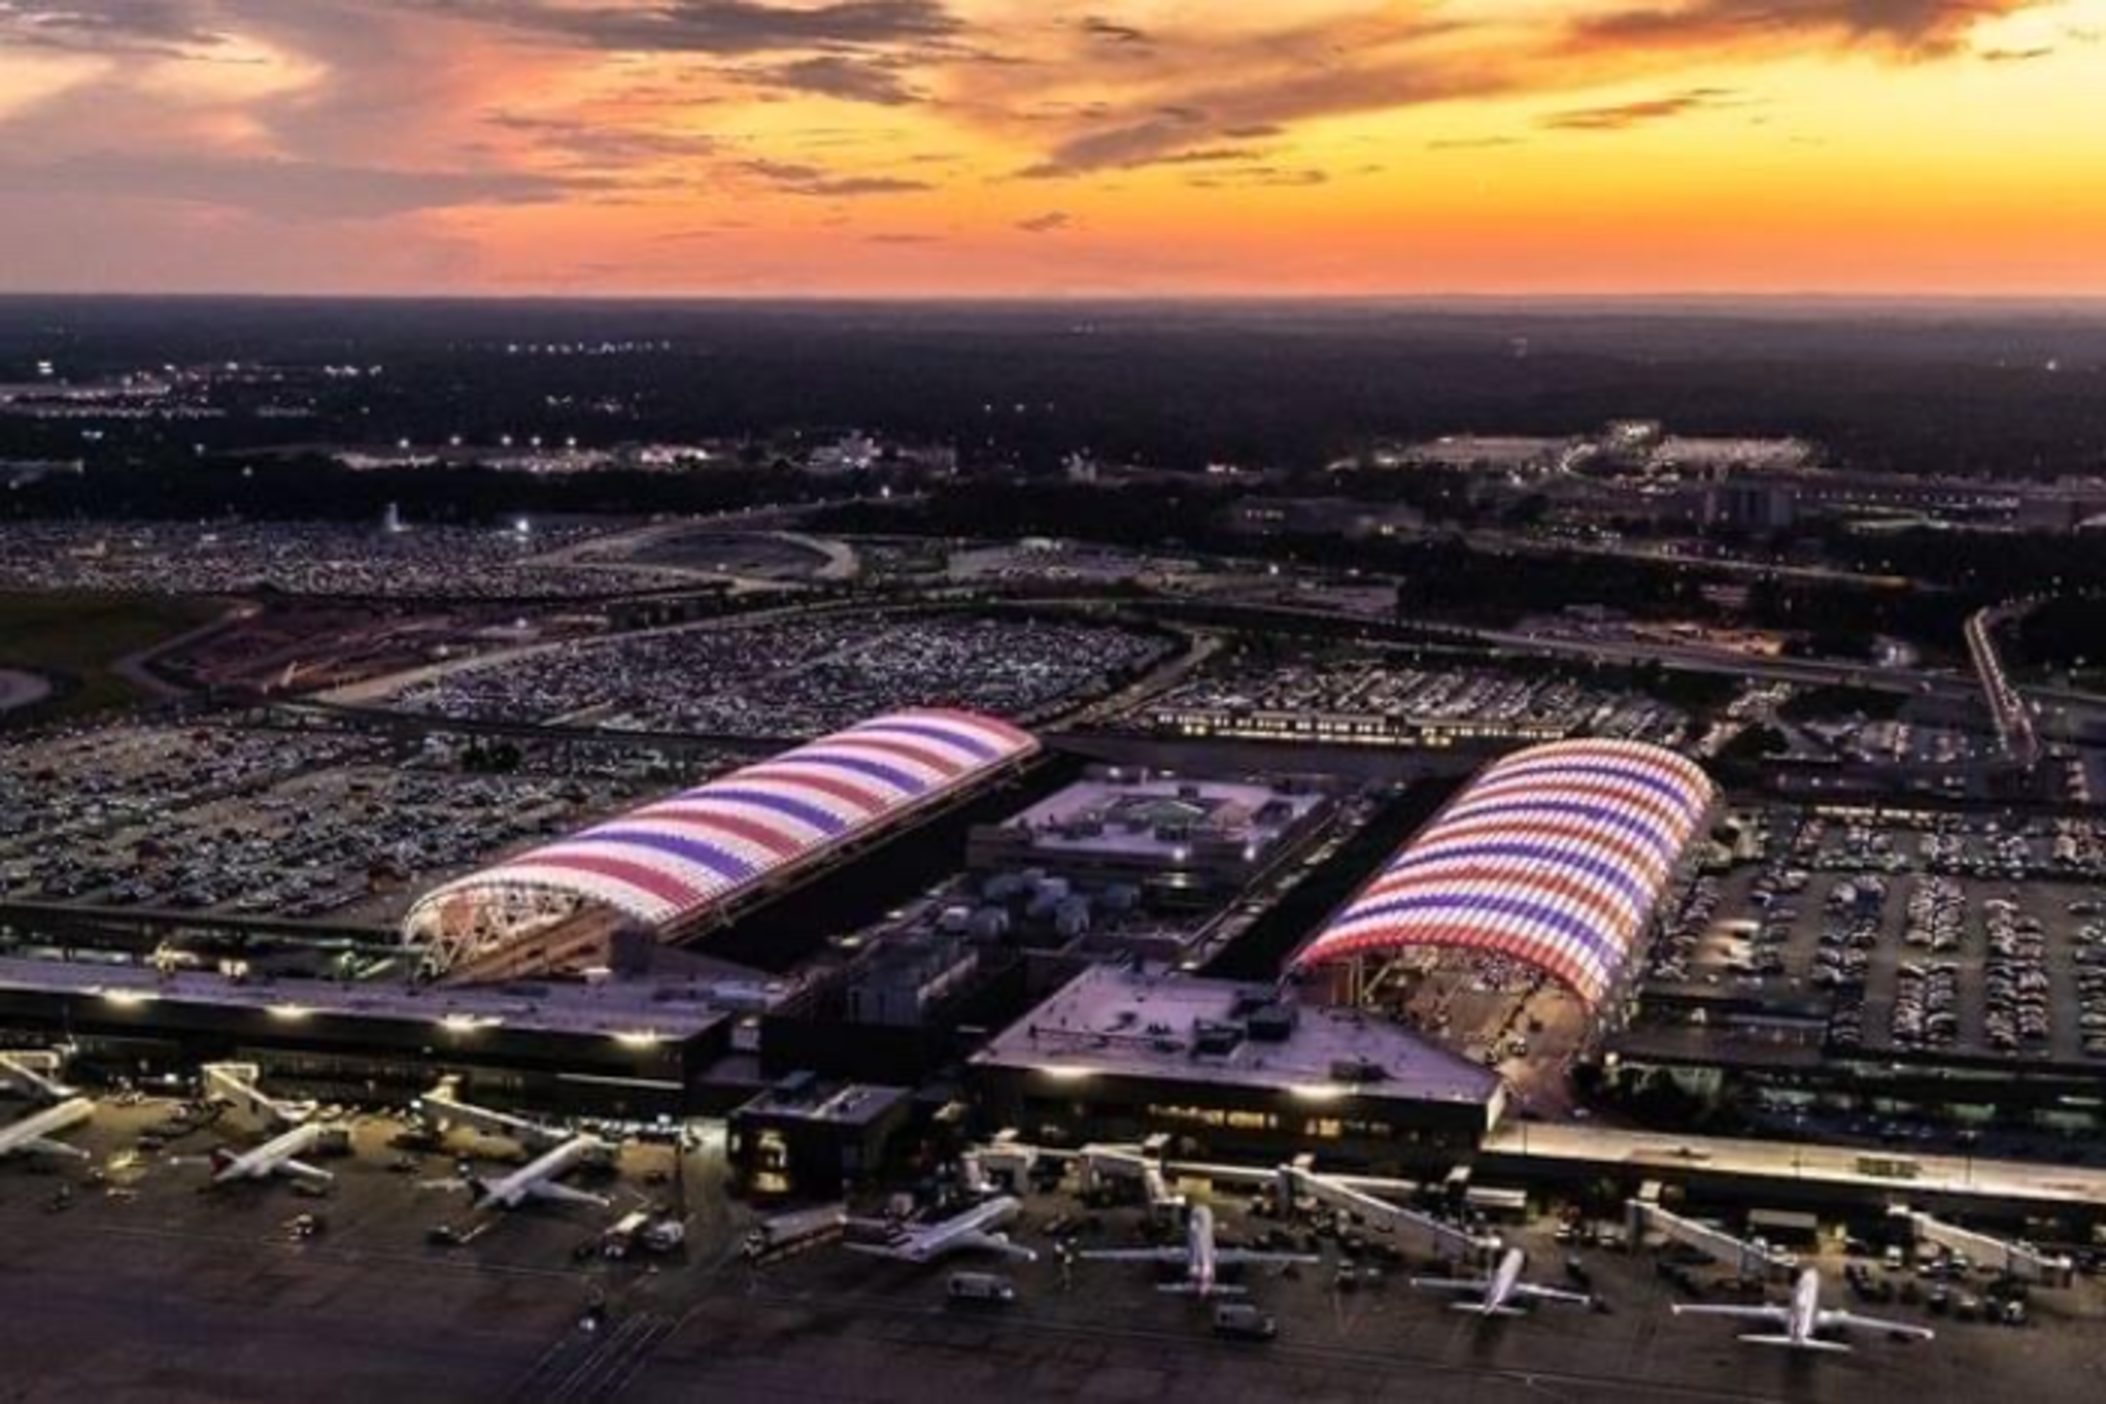 Hartsfield-Jackson Atlanta International Airport holds onto the top rank and is followed by Dubai International Airport for the first time, surpassing Dallas Forth Worth International Airport in third position.